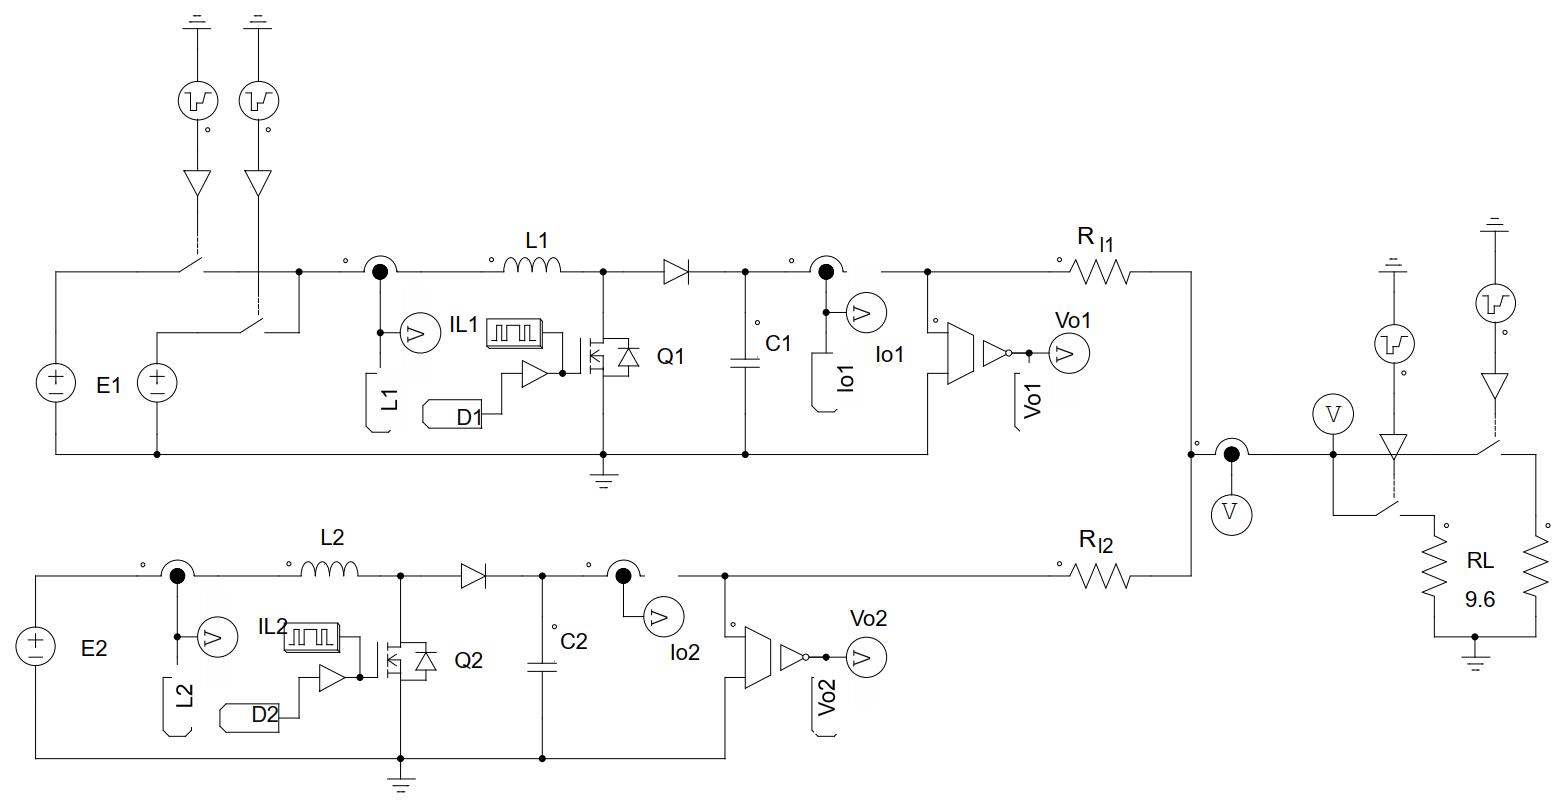 Schematic circuit for the DC microgrid simulated in PSIM